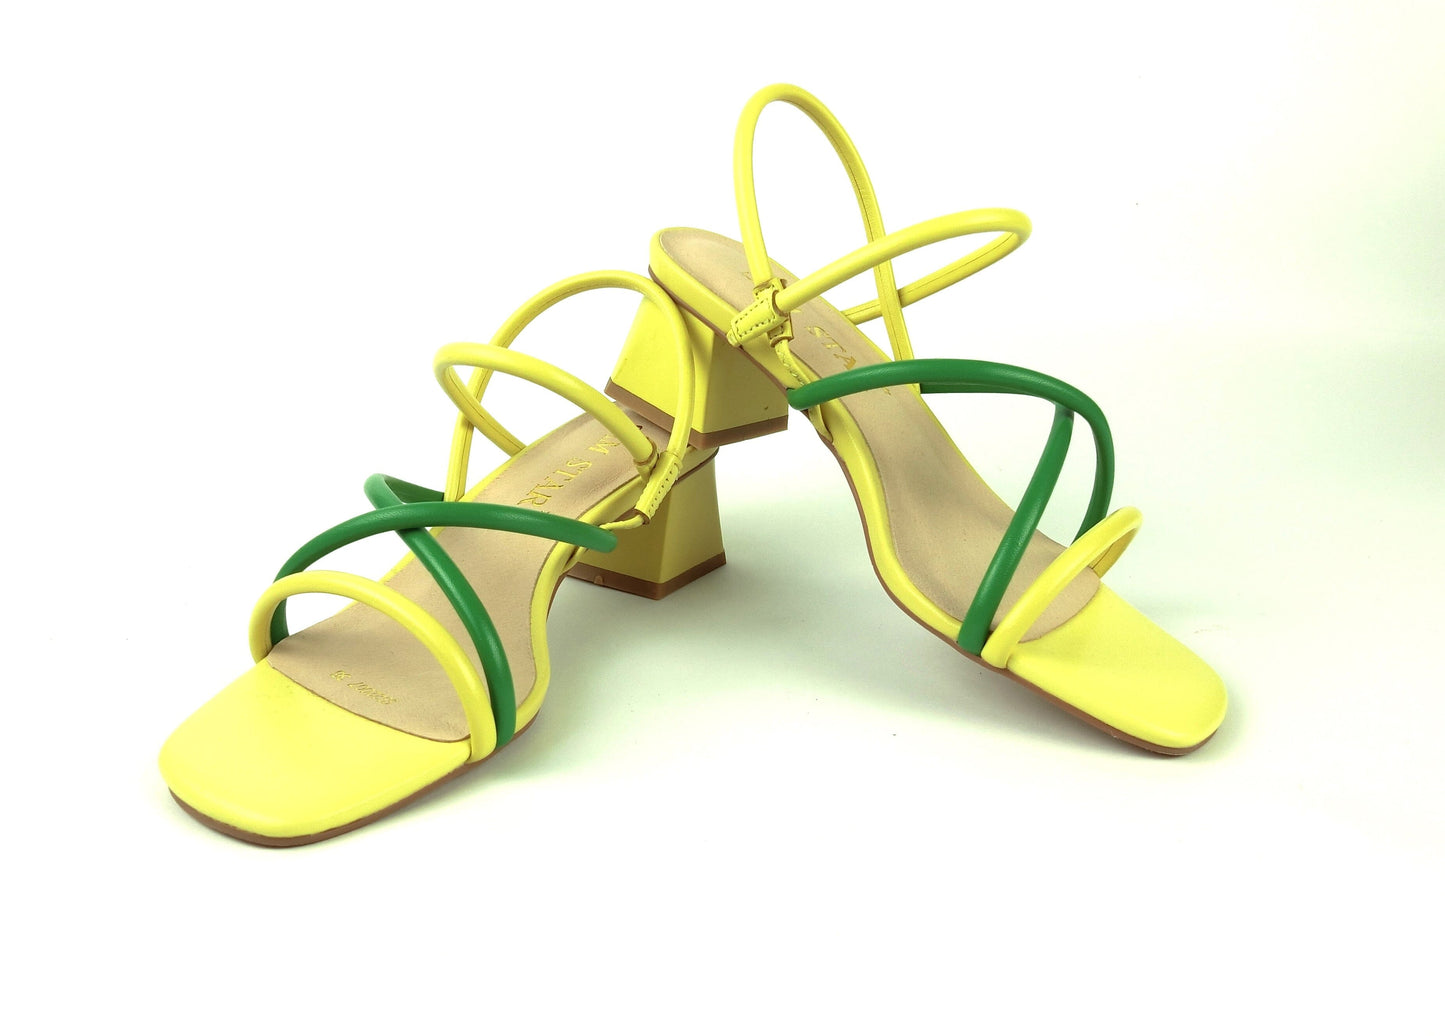 SS22008 Genuine leather strappy block heel sandals in Green and Yellow sandals Sam Star Shoes Green/Yellow 37/4 